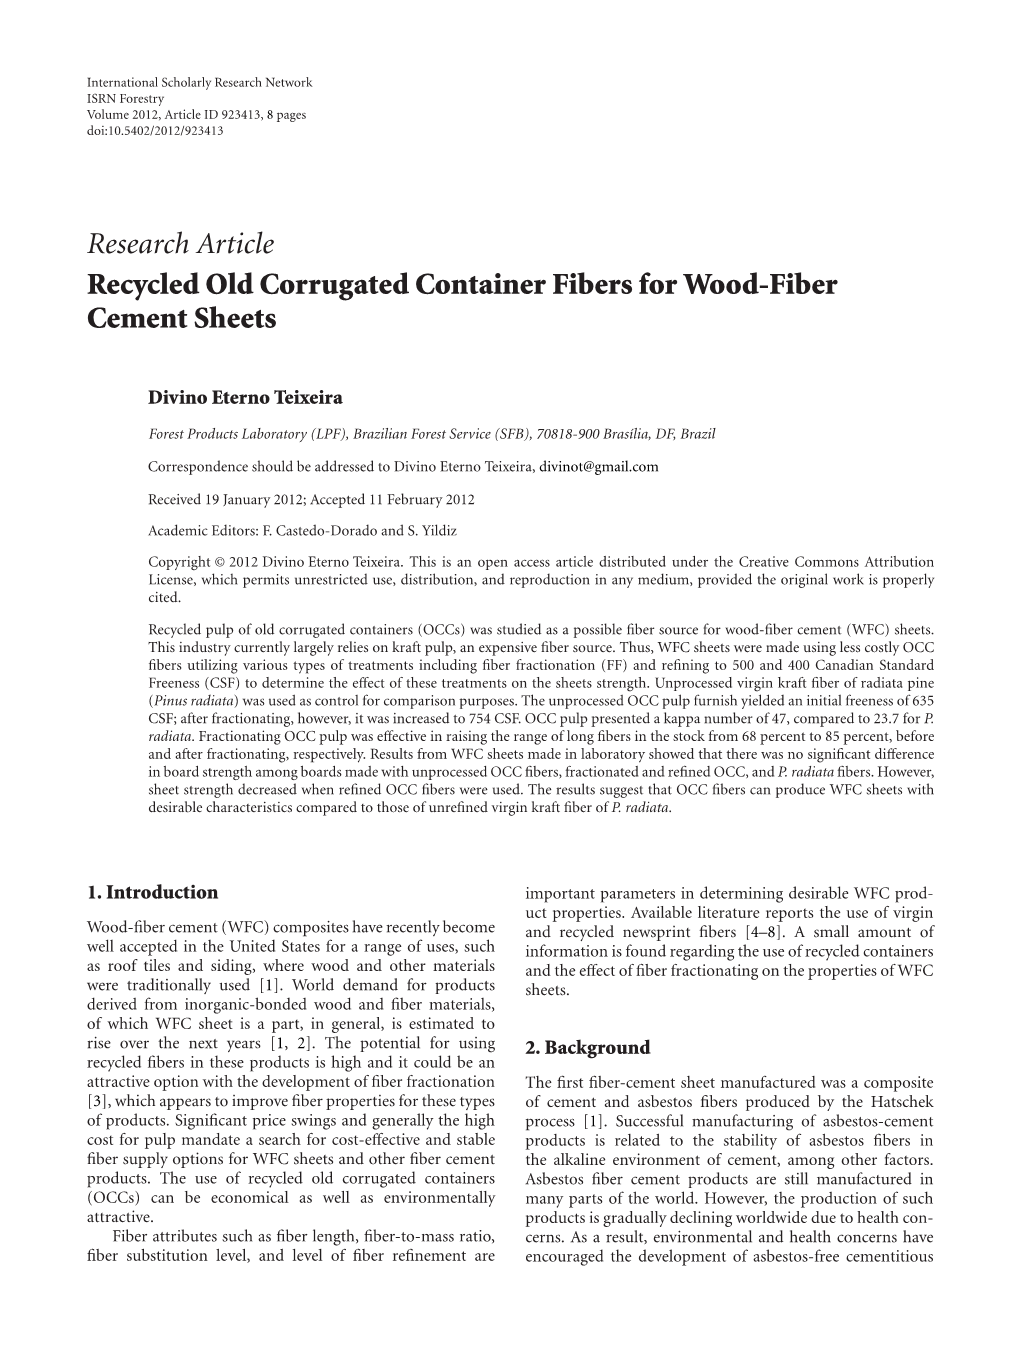 Research Article Recycled Old Corrugated Container Fibers for Wood-Fiber Cement Sheets